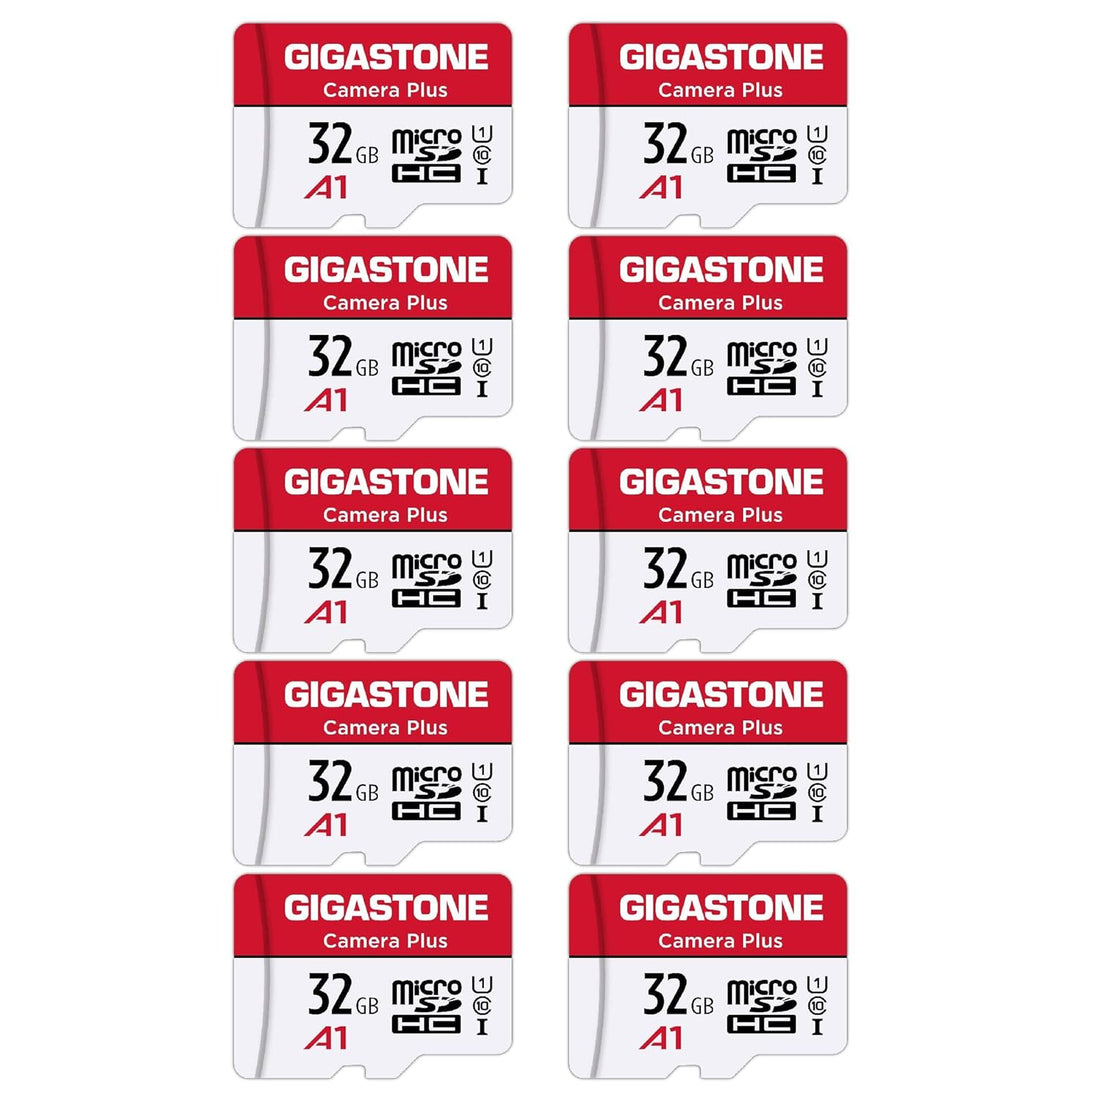 [Gigastone] Micro SD Card 32GB 10 Pack, Camera Plus, MicroSDHC Memory Card for Nintendo-Switch, Smartpone, Roku, Full HD Video Recording, UHS-I U1 A1 Class 10, up to 90MB/s, with SD Adapter